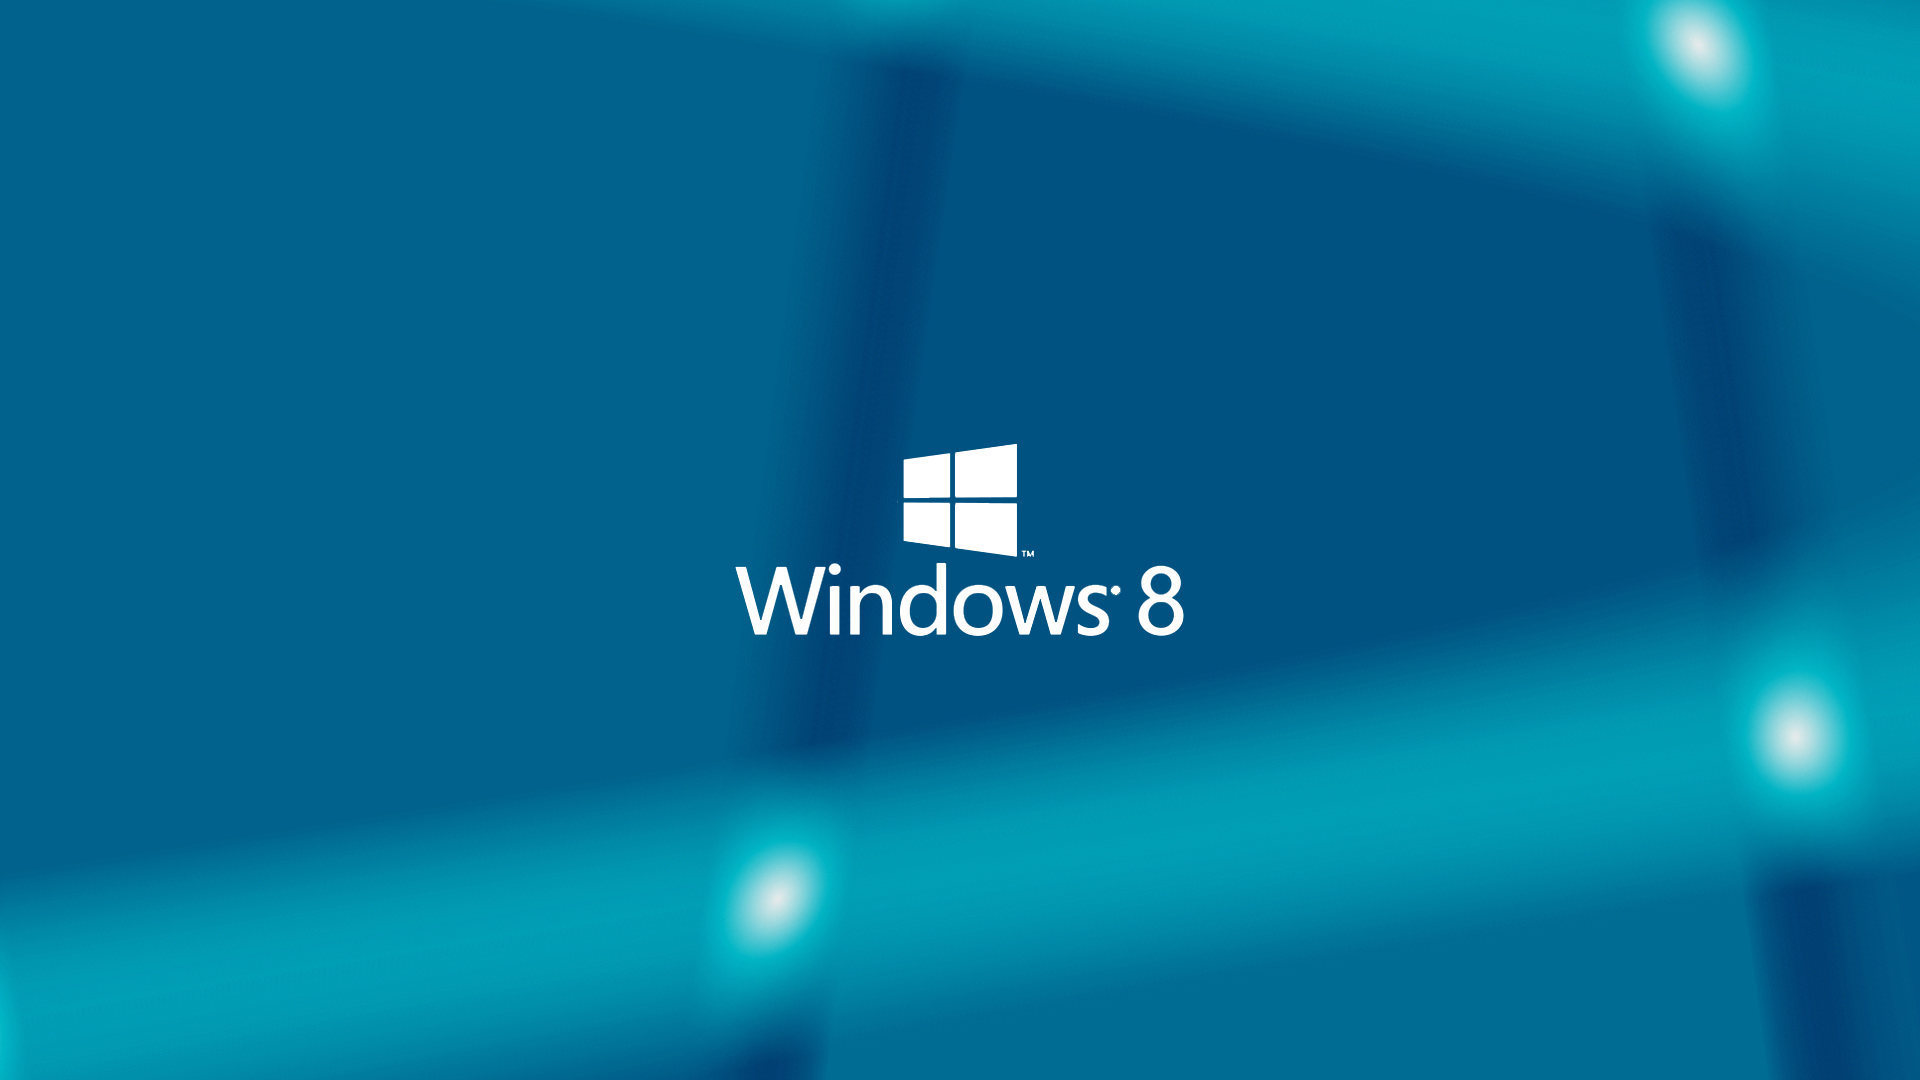 Windows 8 Backgrounds on Wallpapers Vista